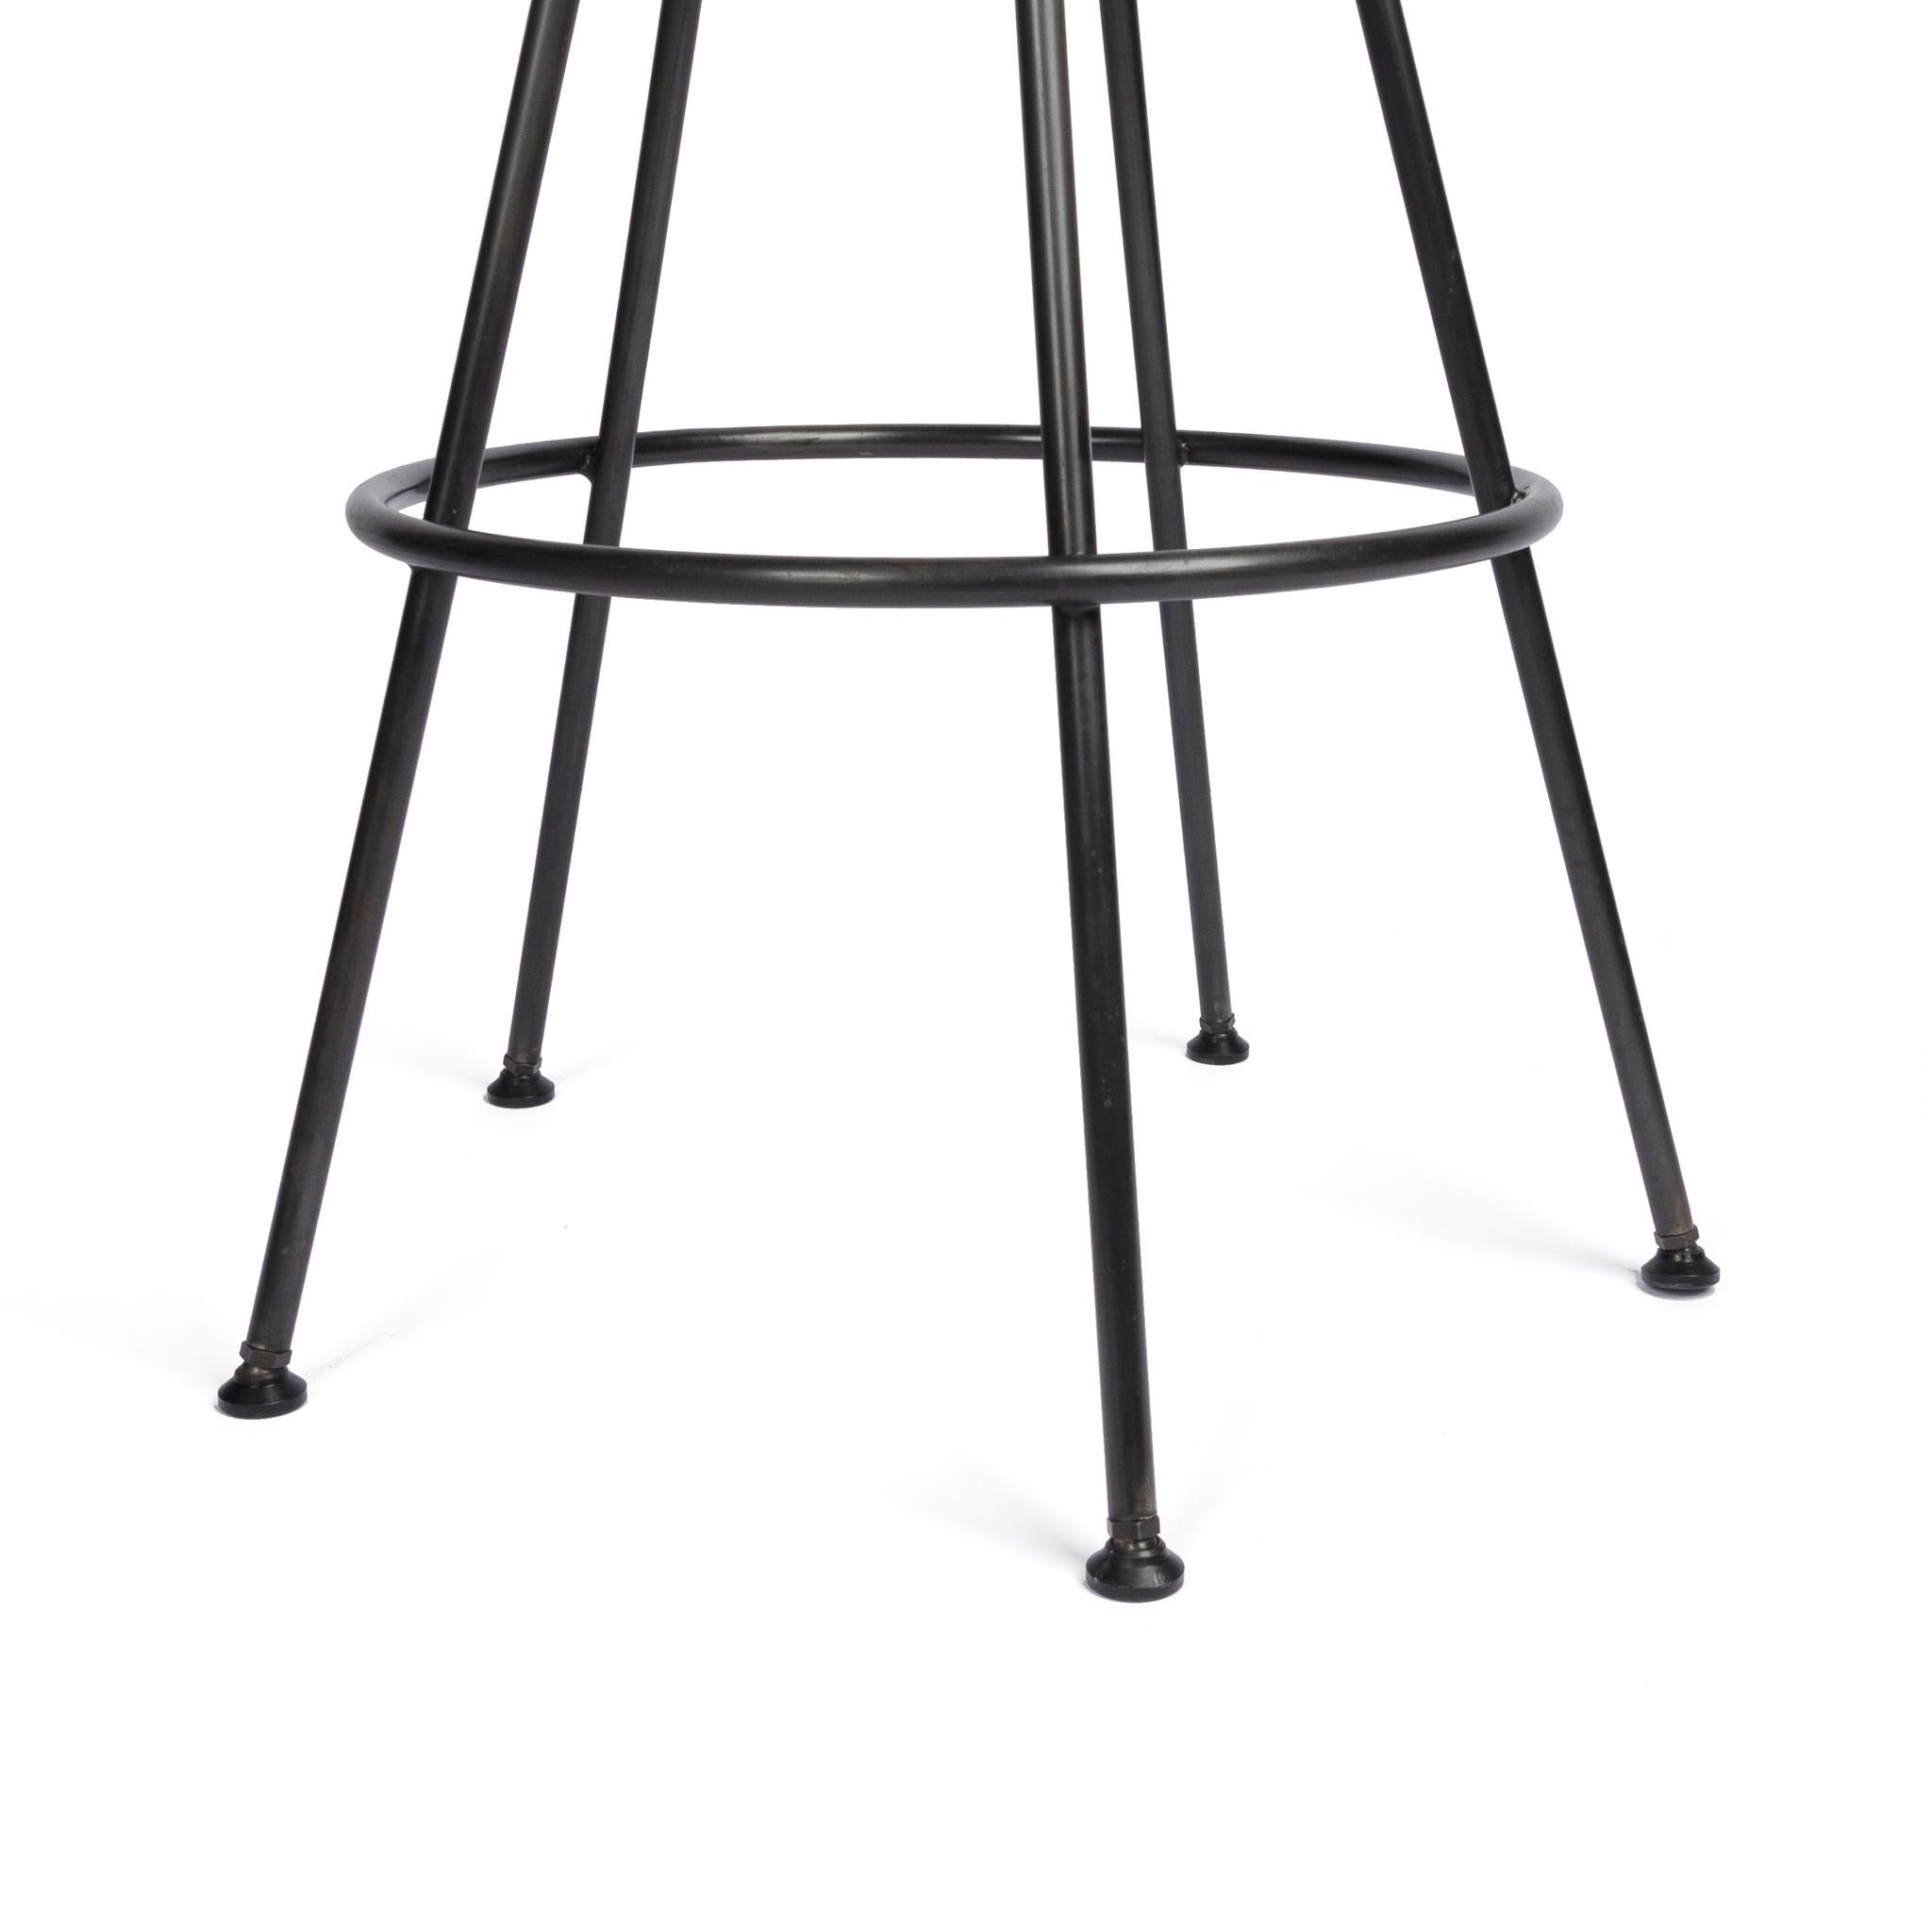 Urban Industrial Five Leg Round Bar Stool Backless Metal Seat Blackened Finish In New Condition For Sale In Seattle, WA